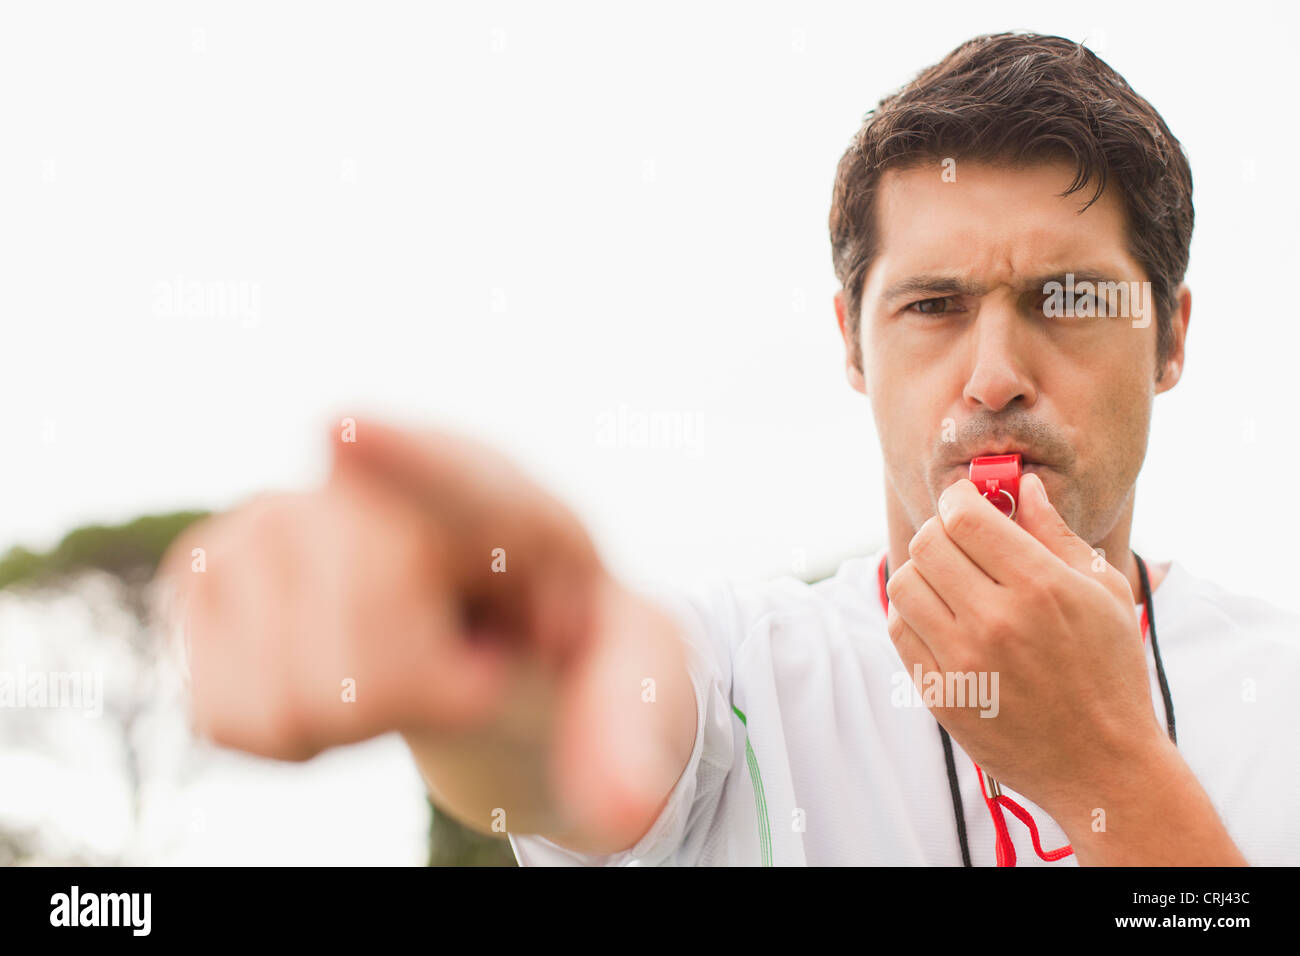 Referee blowing whistle in game Stock Photo